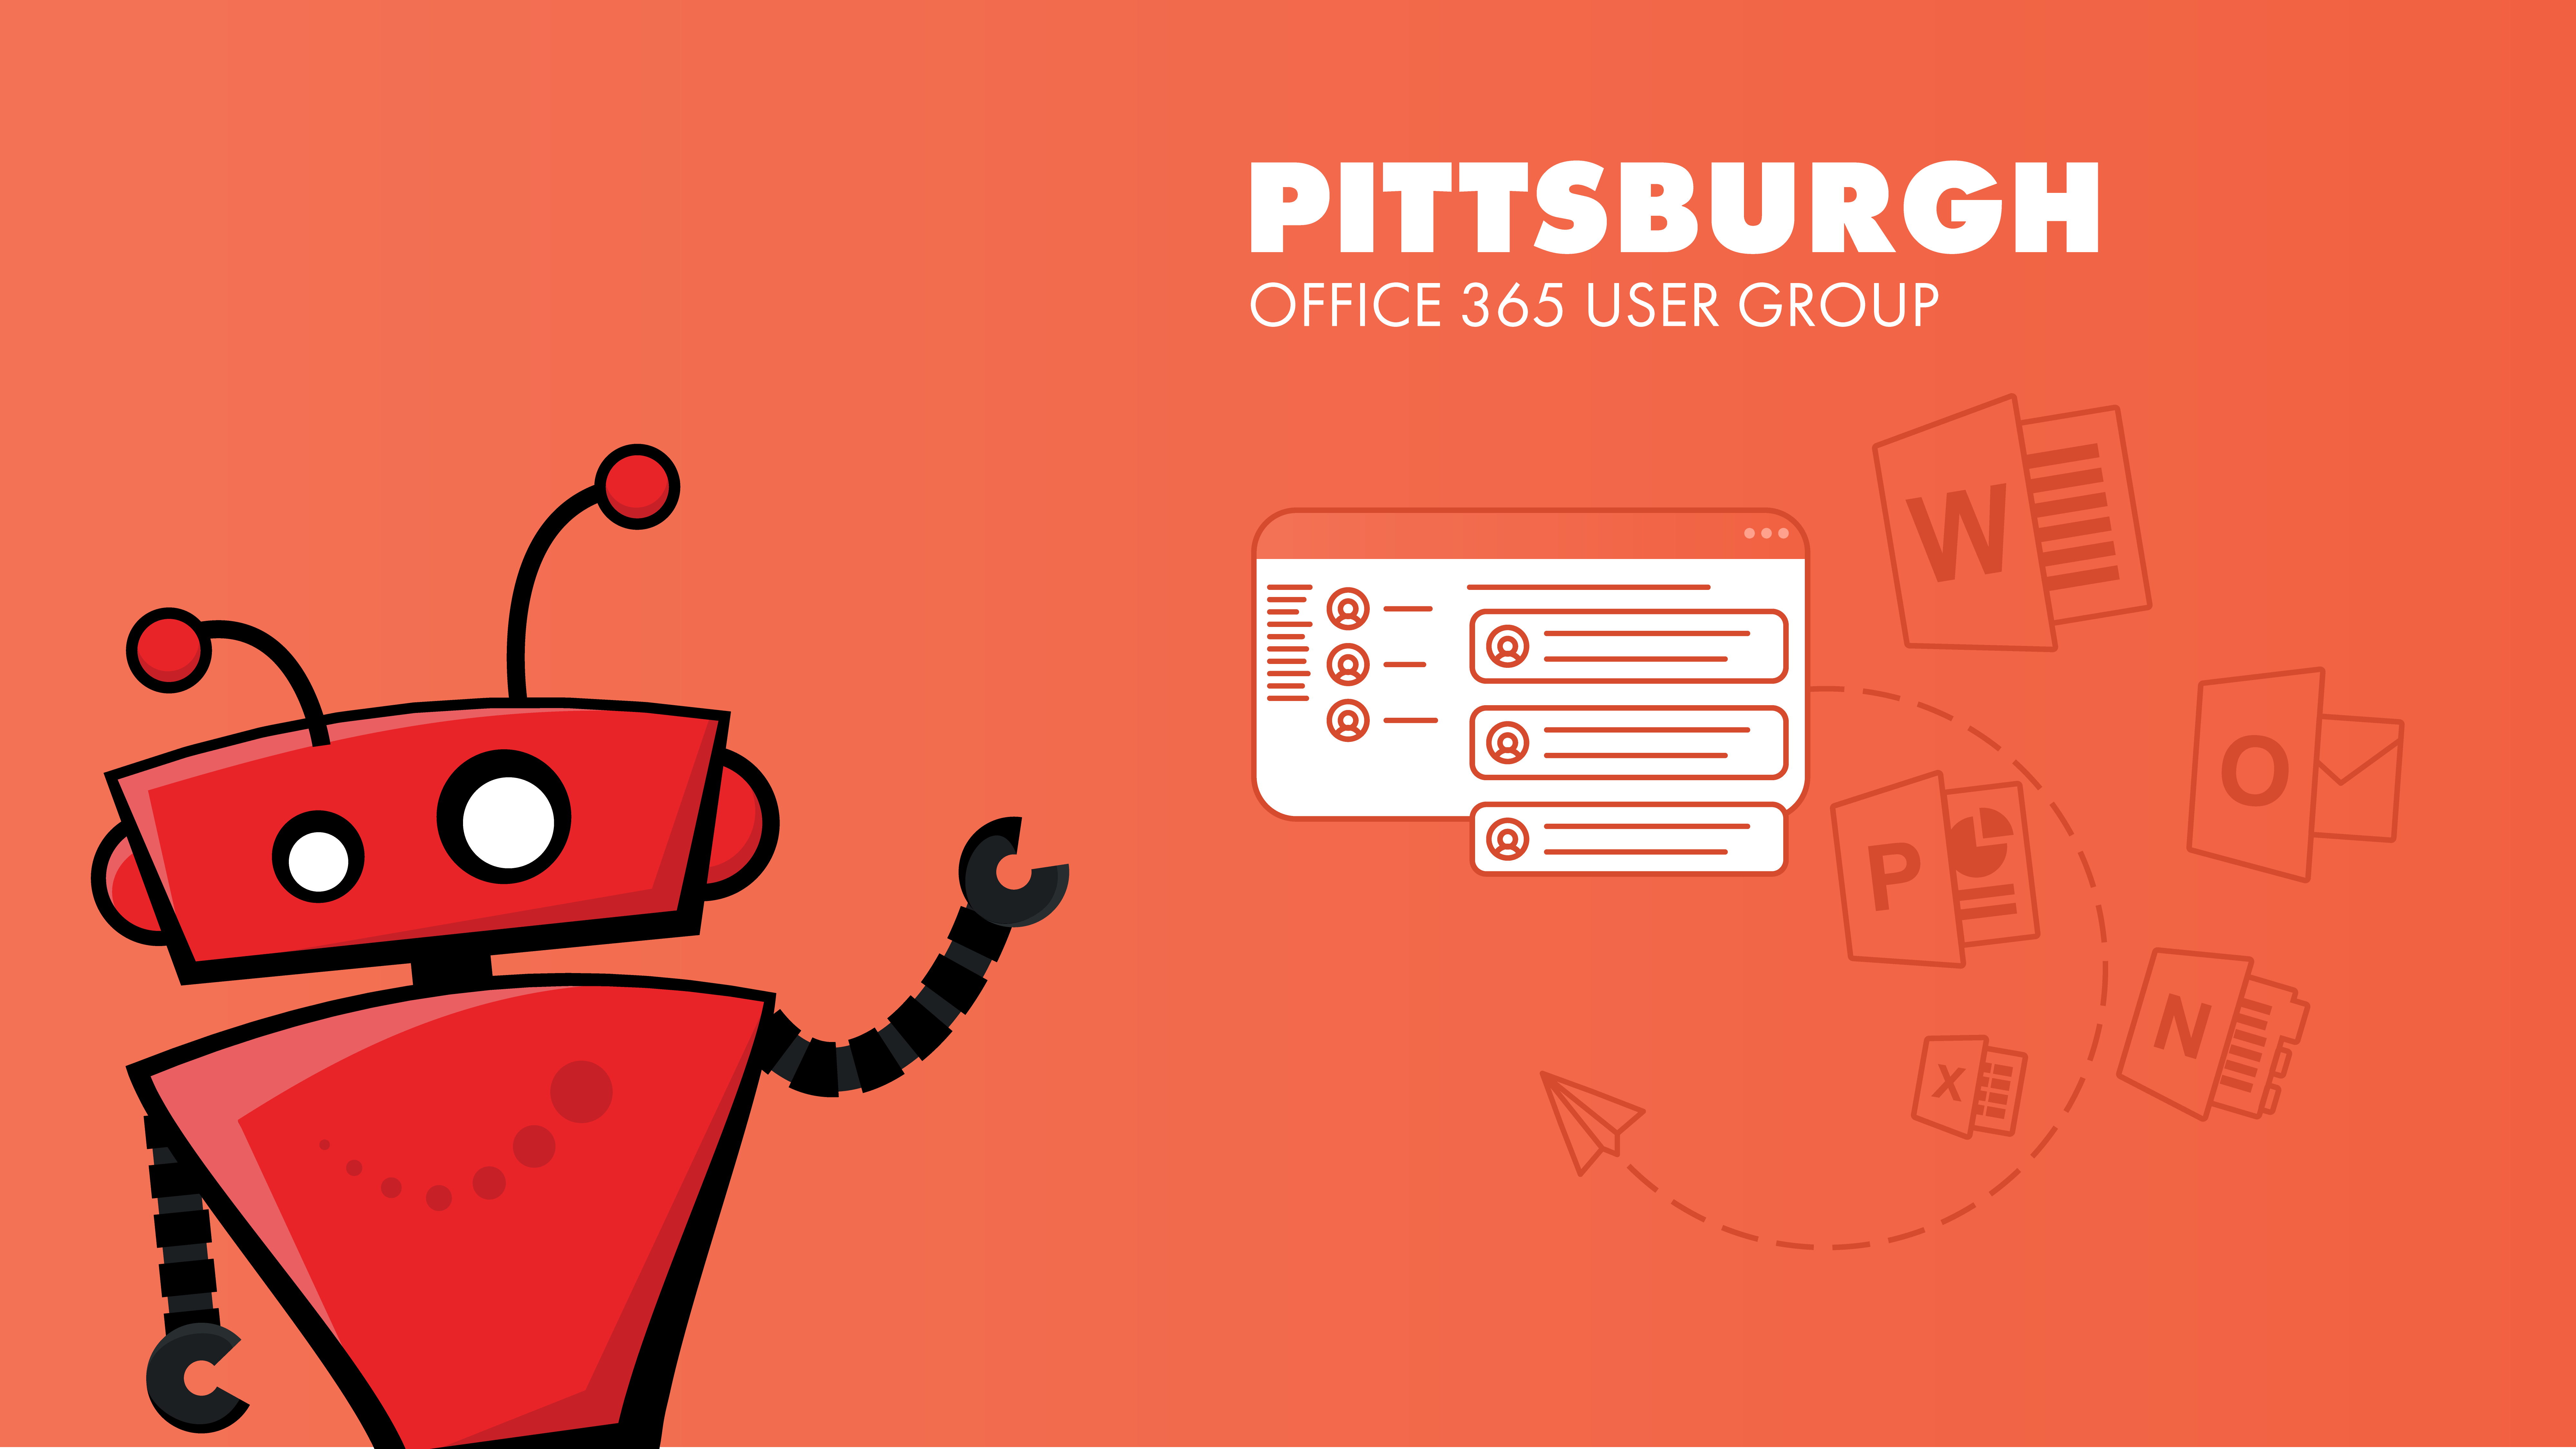 Join the Pittsburgh Office 365 User Group